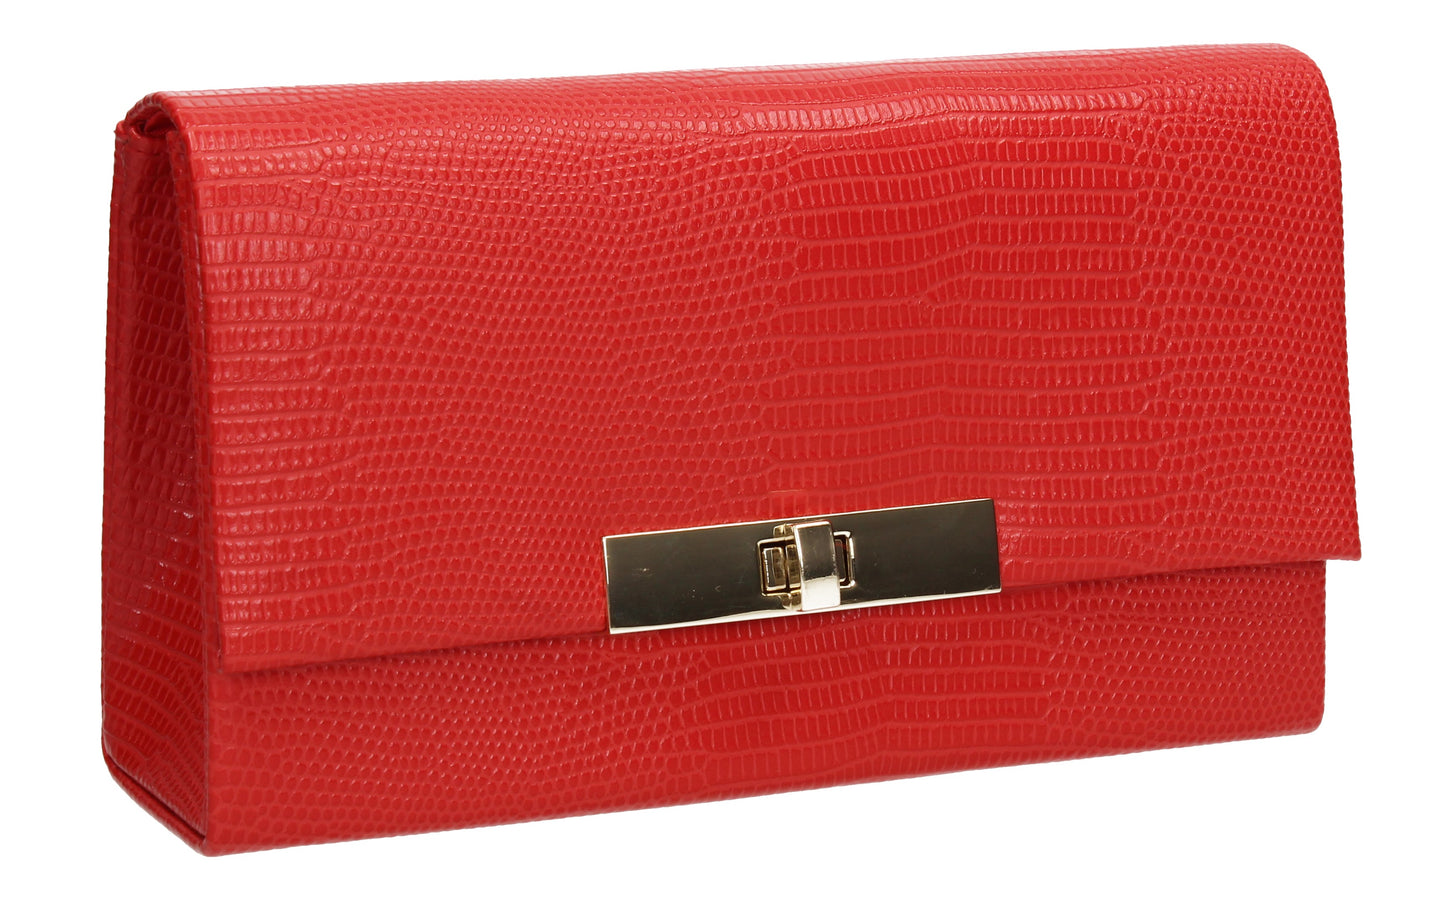 Tana Faux Leather Animal Style Clutch Bag Red